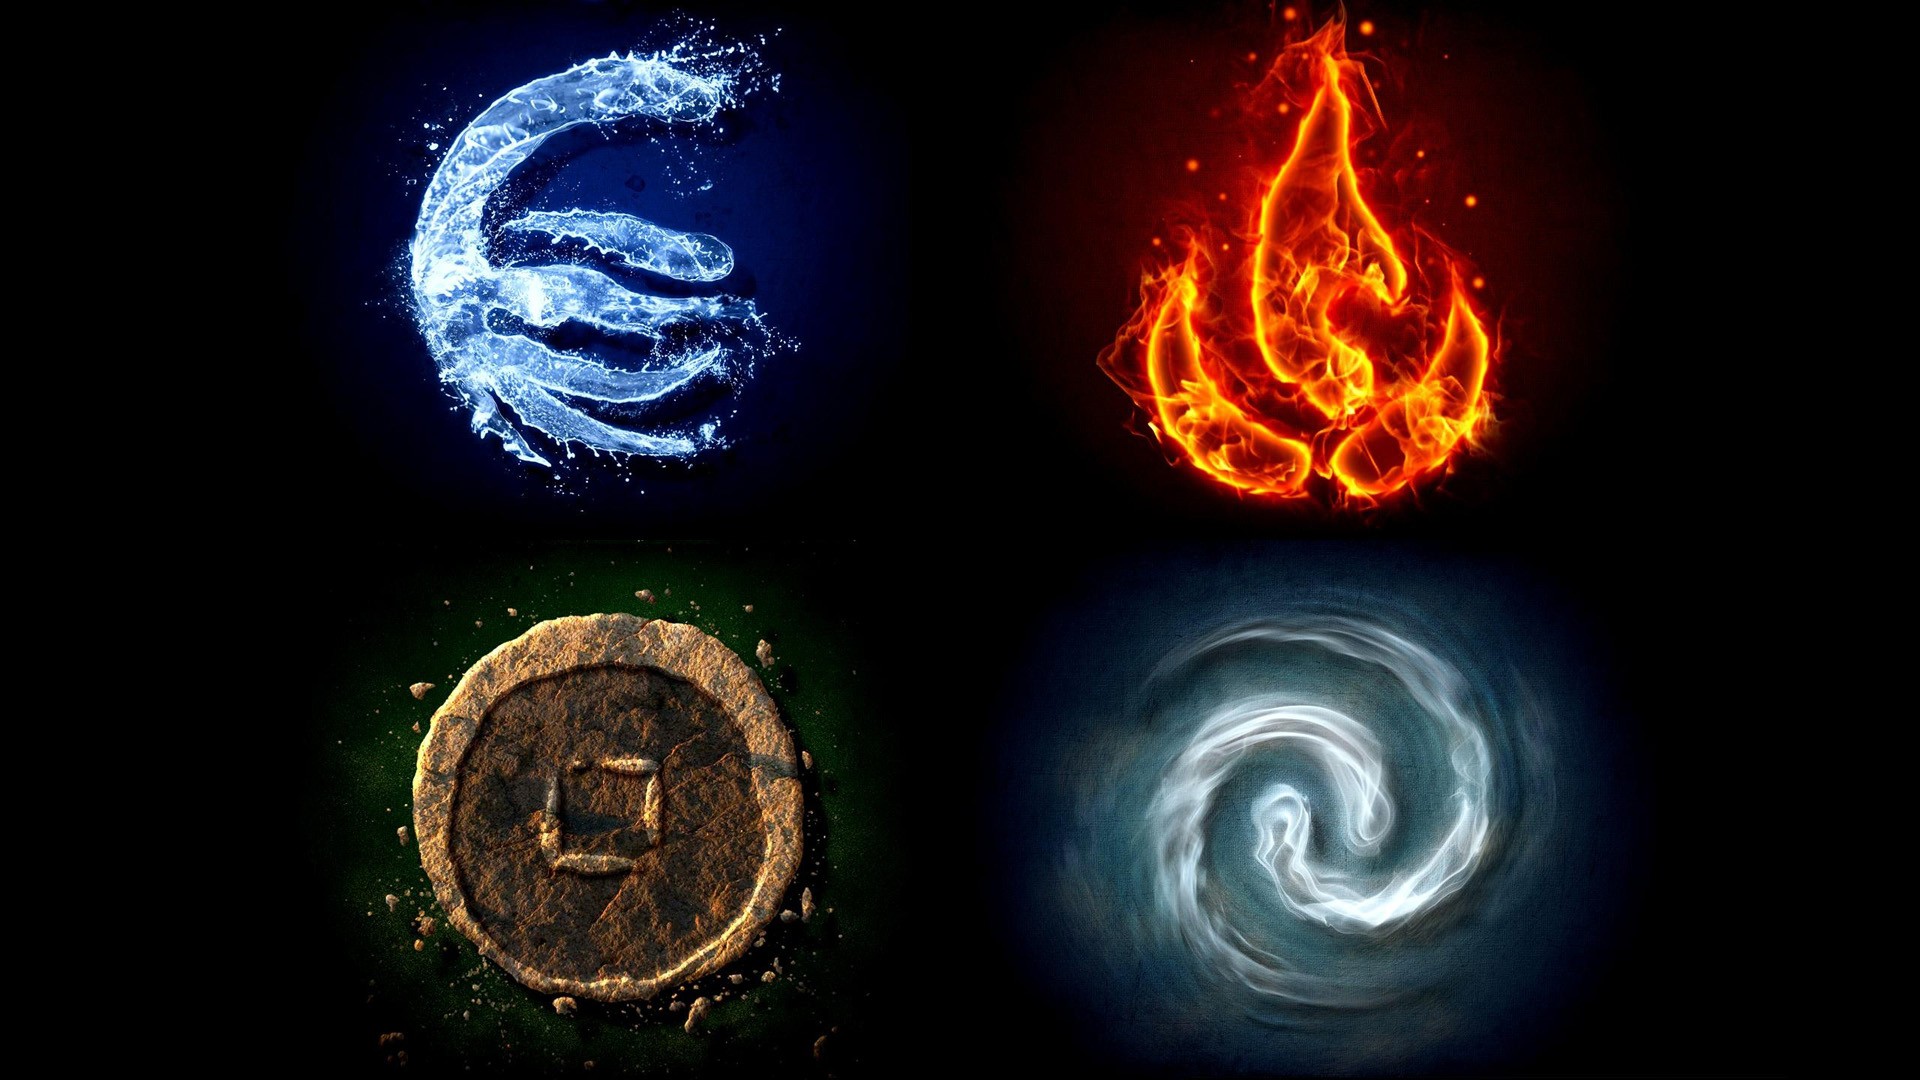 Avatar The Last Airbender Anime Four Elements Wallpaper -  Resolution:1920x1080 - ID:73864 